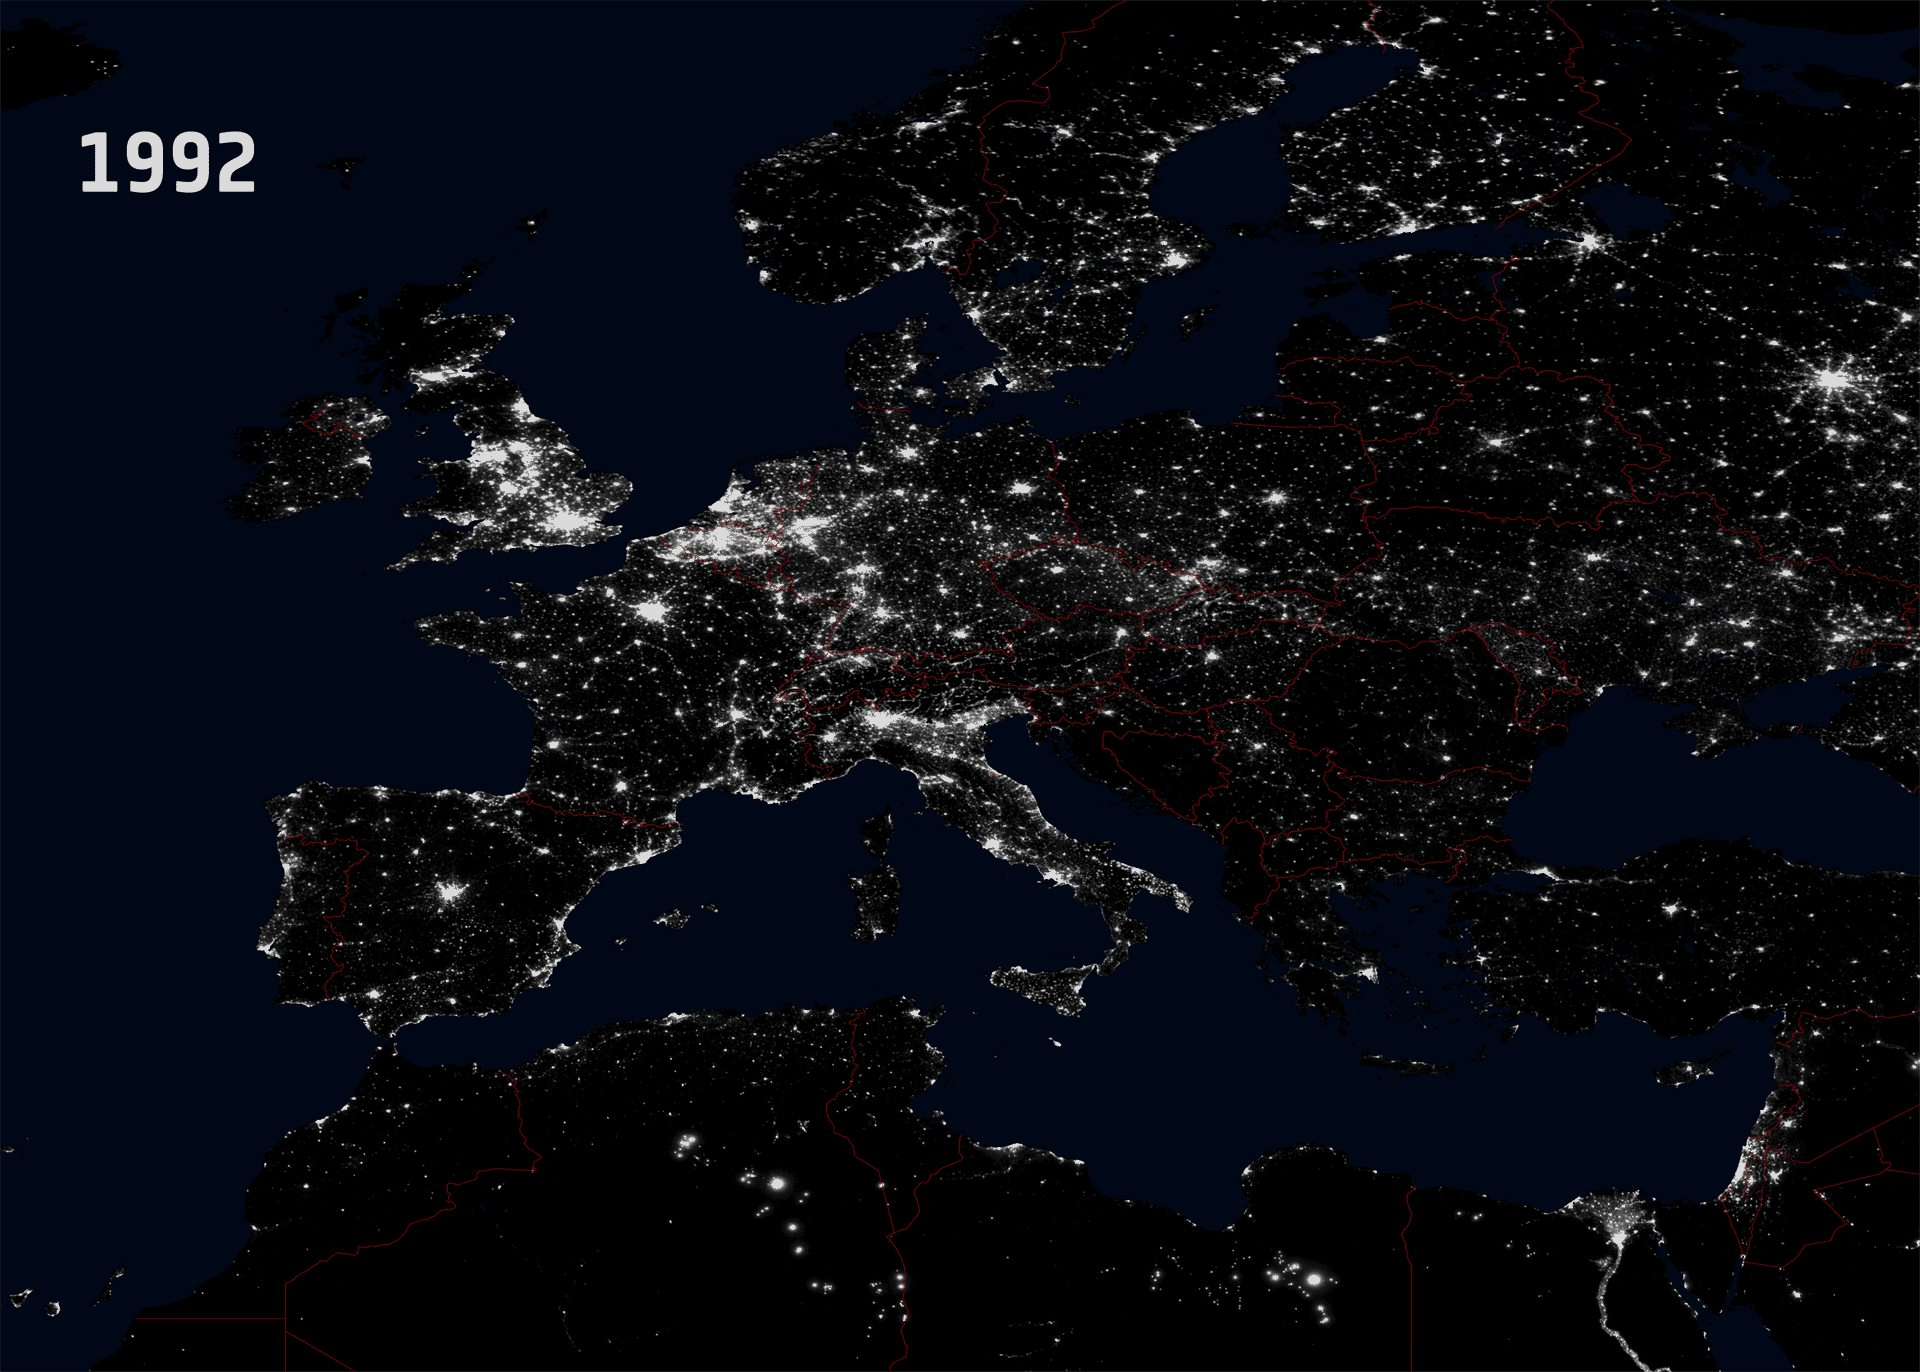 Night lights in Europe as seen from satellites